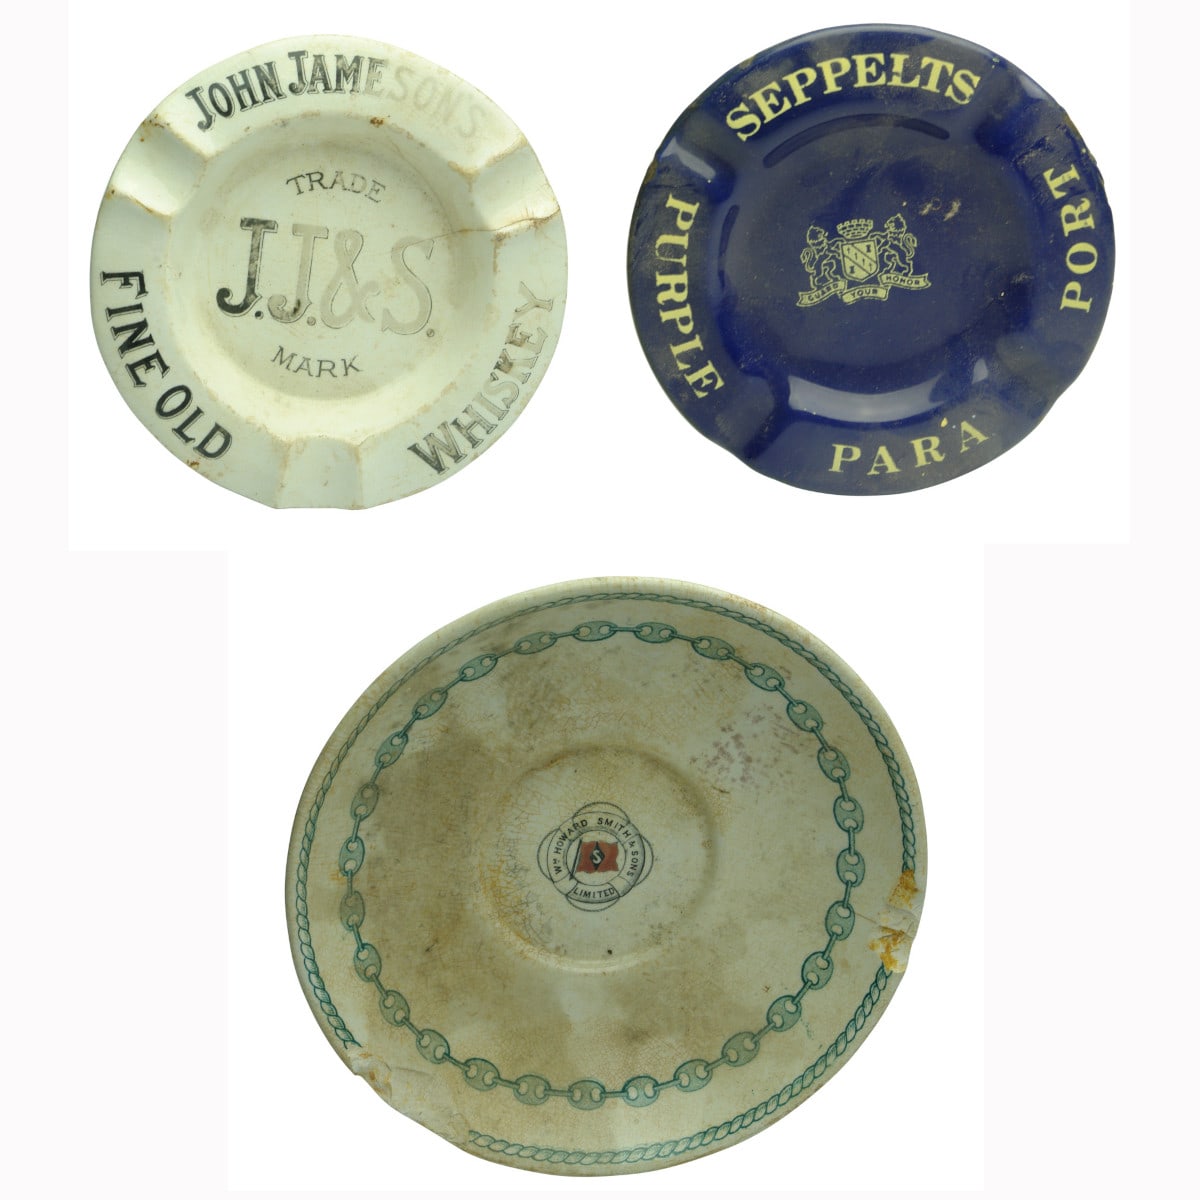 Pair of Advertising Ashtrays and a shipping china sauce plate: Jameson's Old Whisky and Seppelts Para Port.